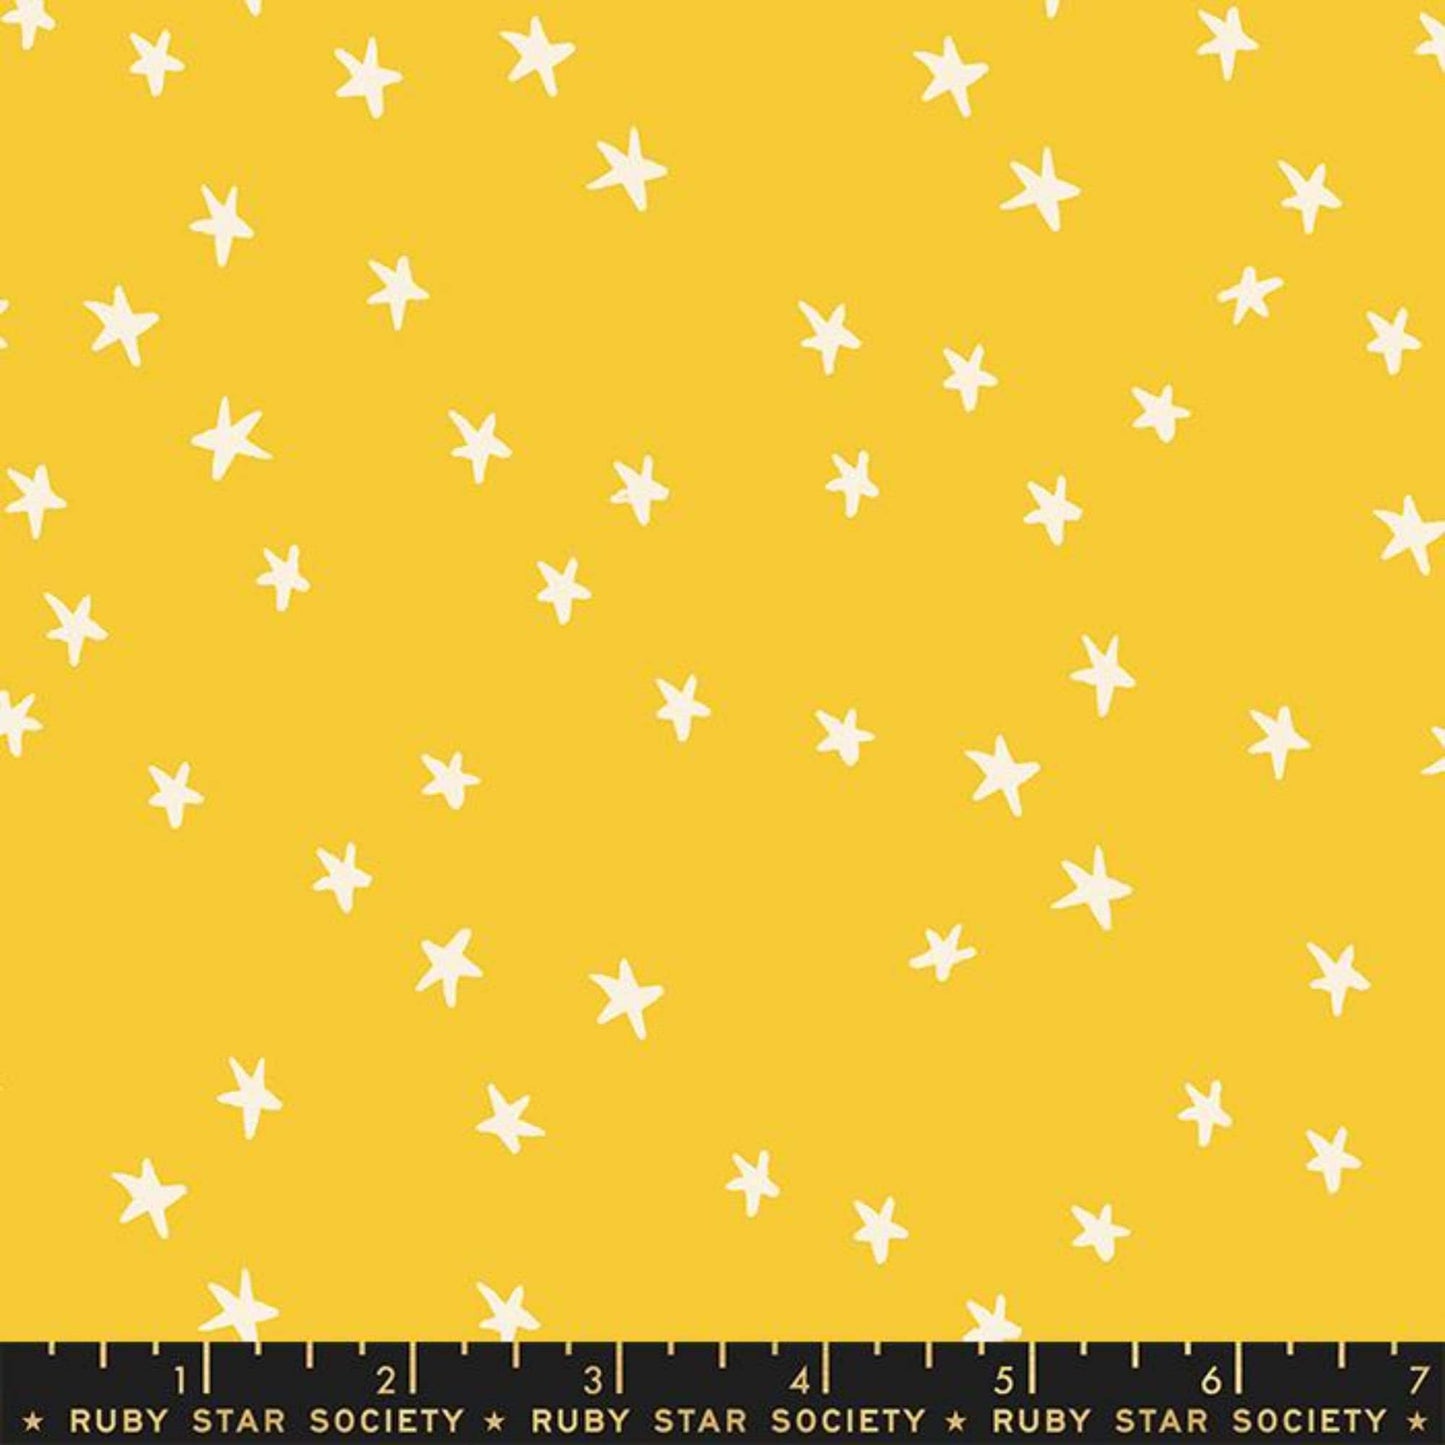 Starry Sunshine Starry Alexia Abegg Ruby Star Society Fabric Moda 100% Quilters Cotton RS4109 62 Fabric Fetish